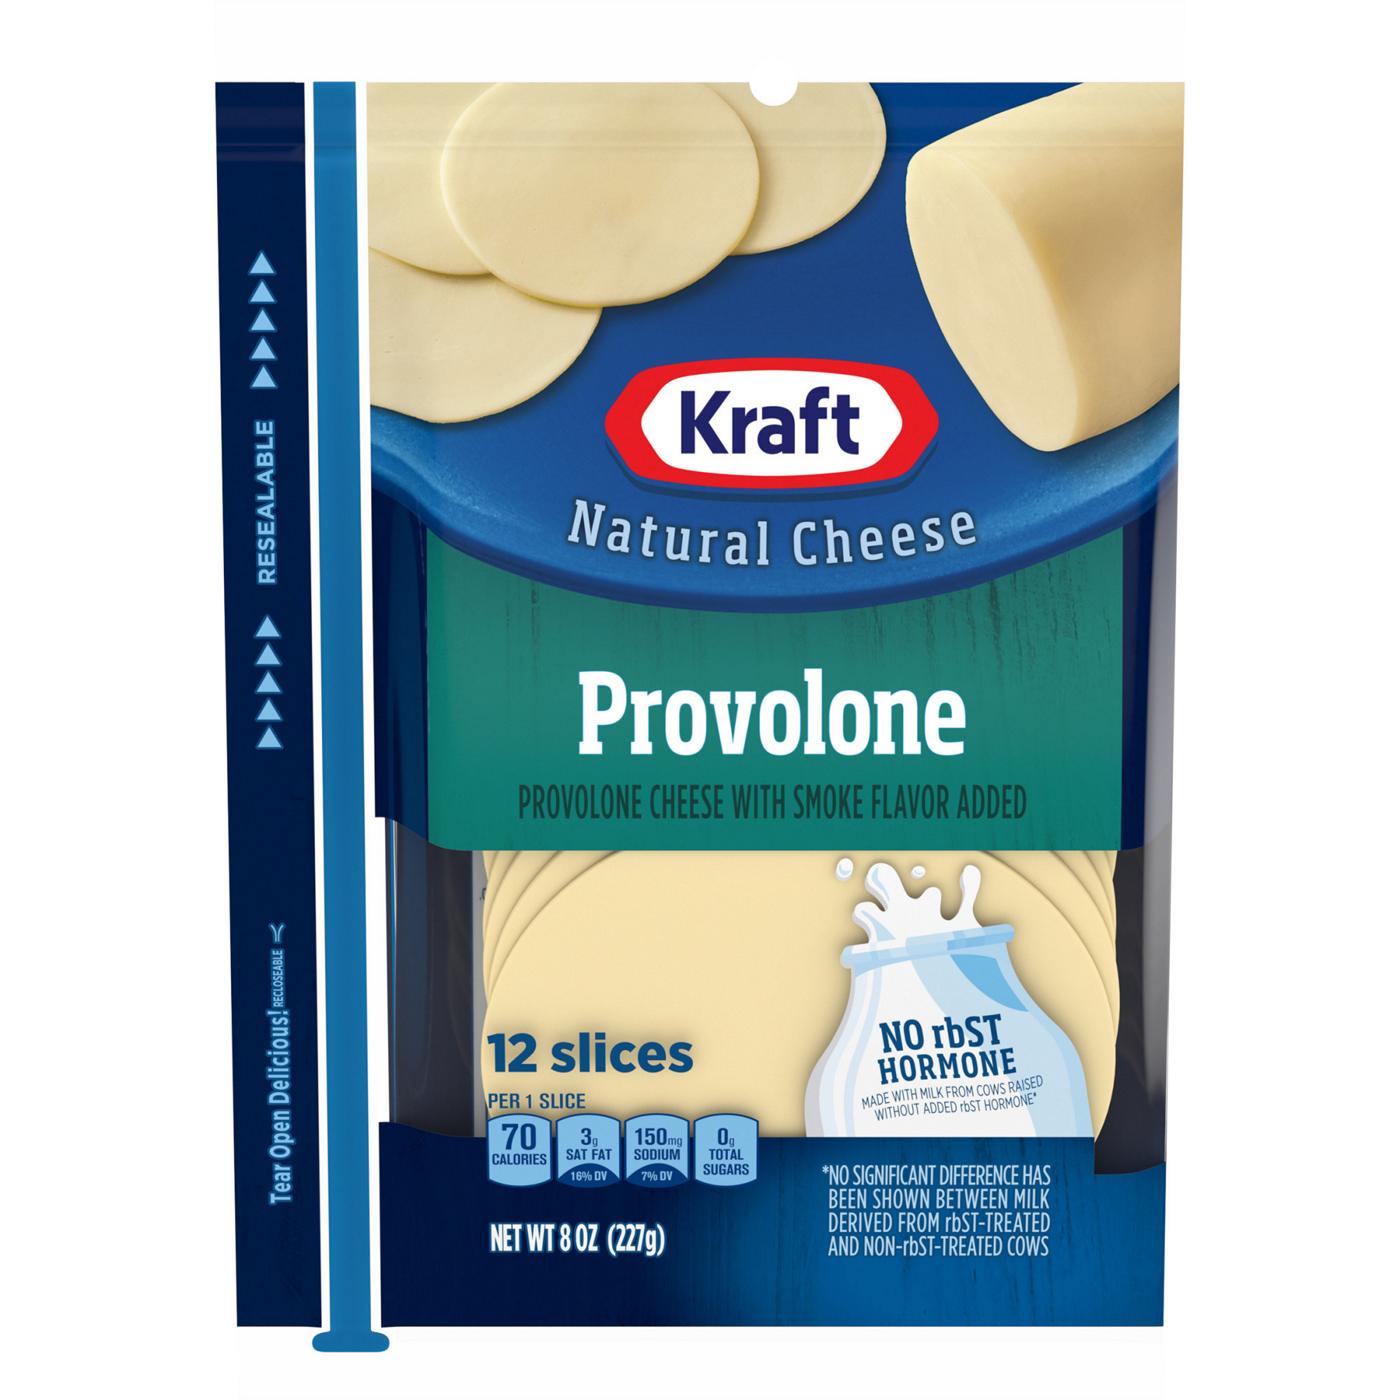 Kraft Provolone Sliced Cheese; image 1 of 2